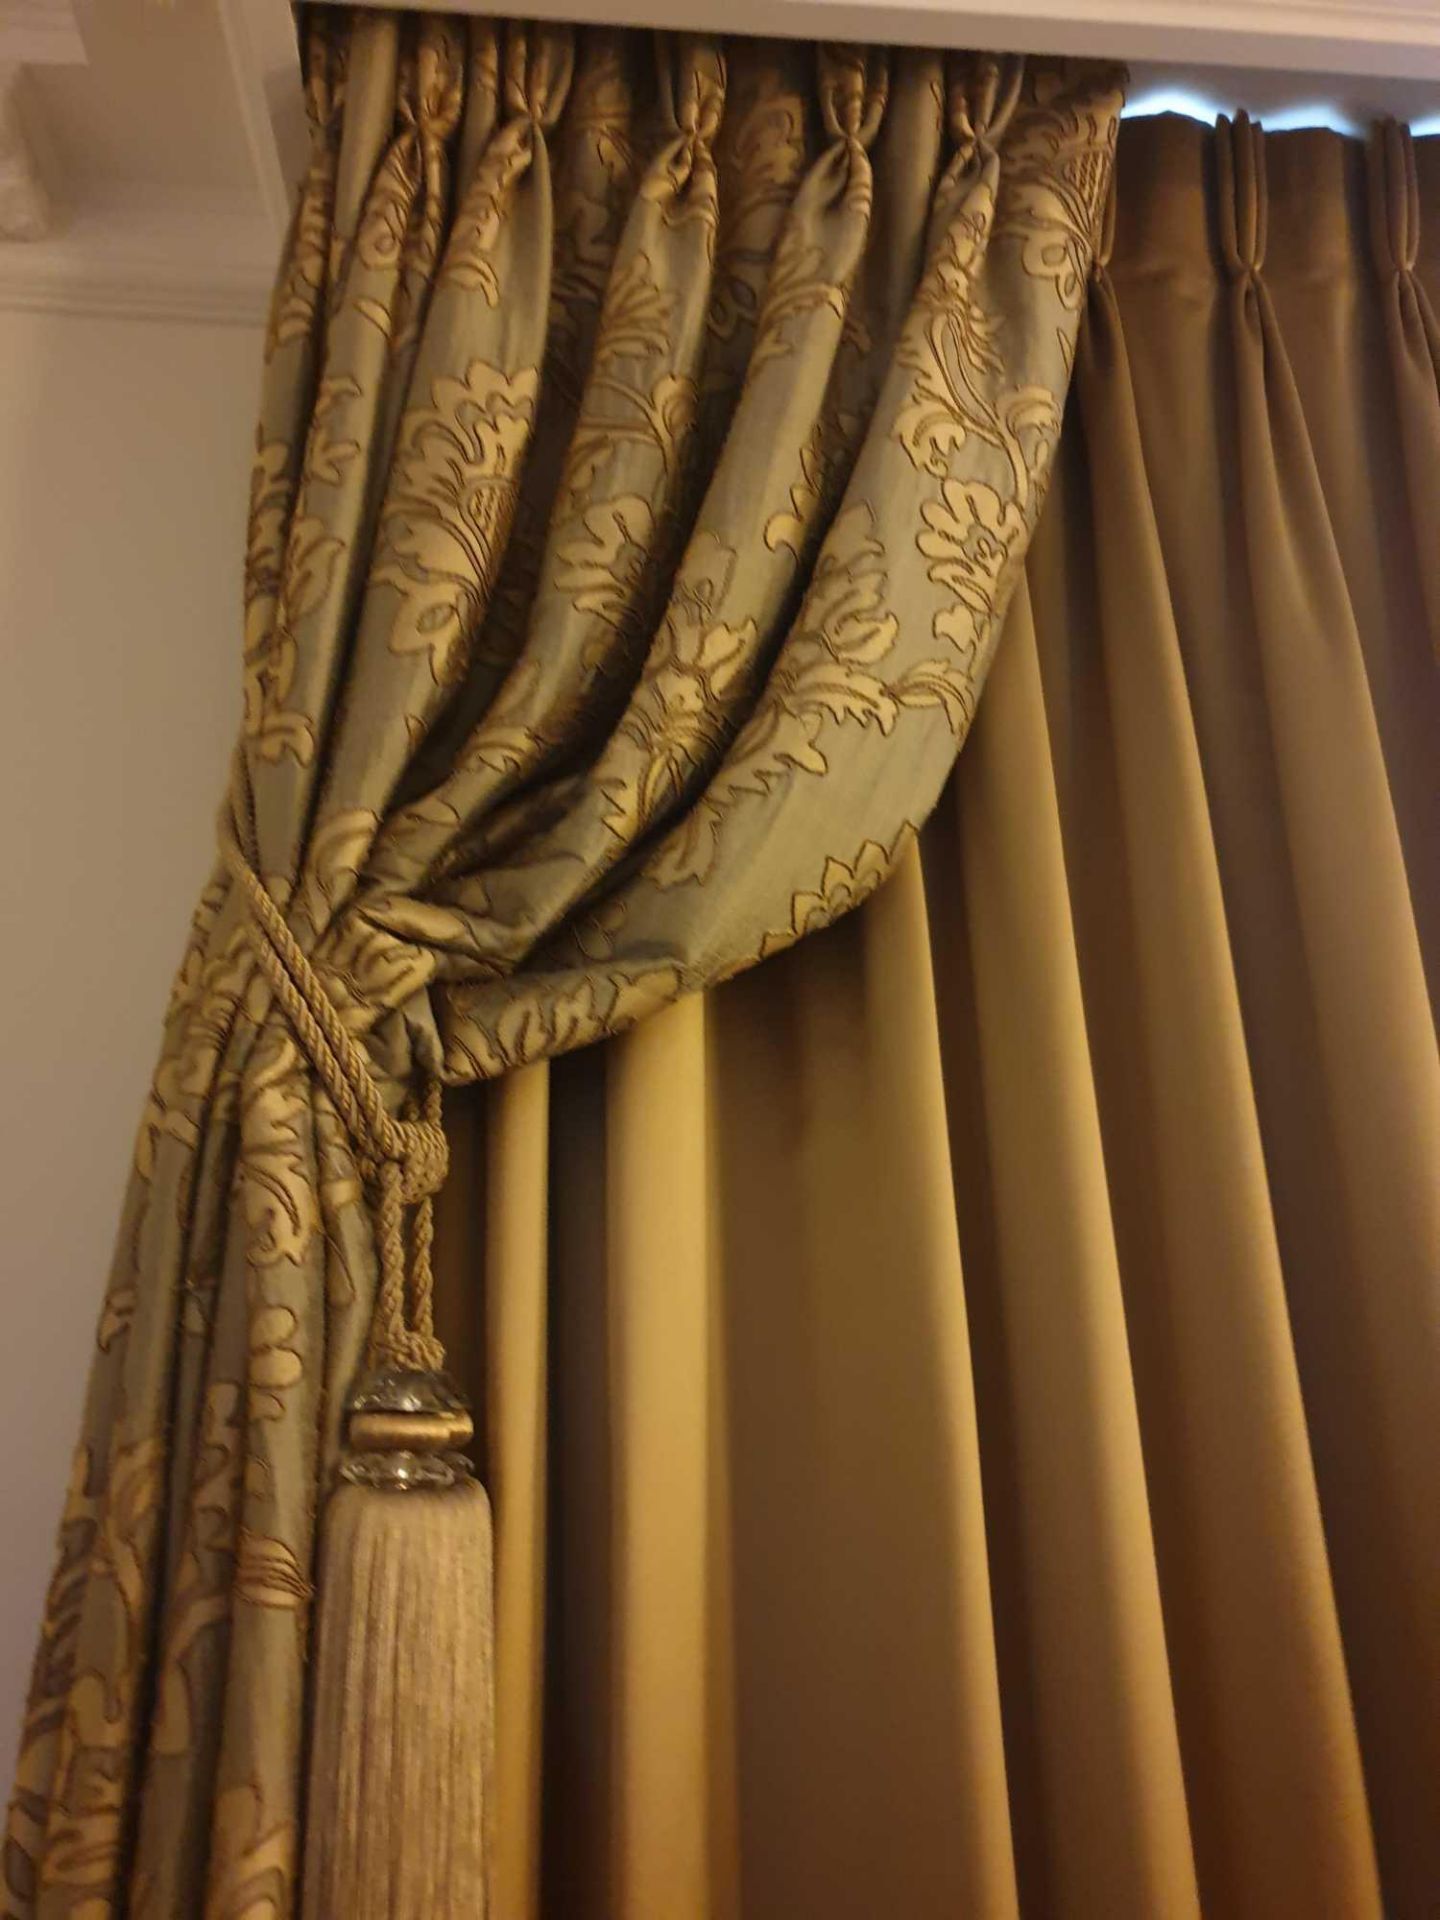 A Pair Of Silk Drapes And Jabots Gold With Intricate Piping And Crystal Bead Trim 240 x 280cm ( - Image 2 of 2